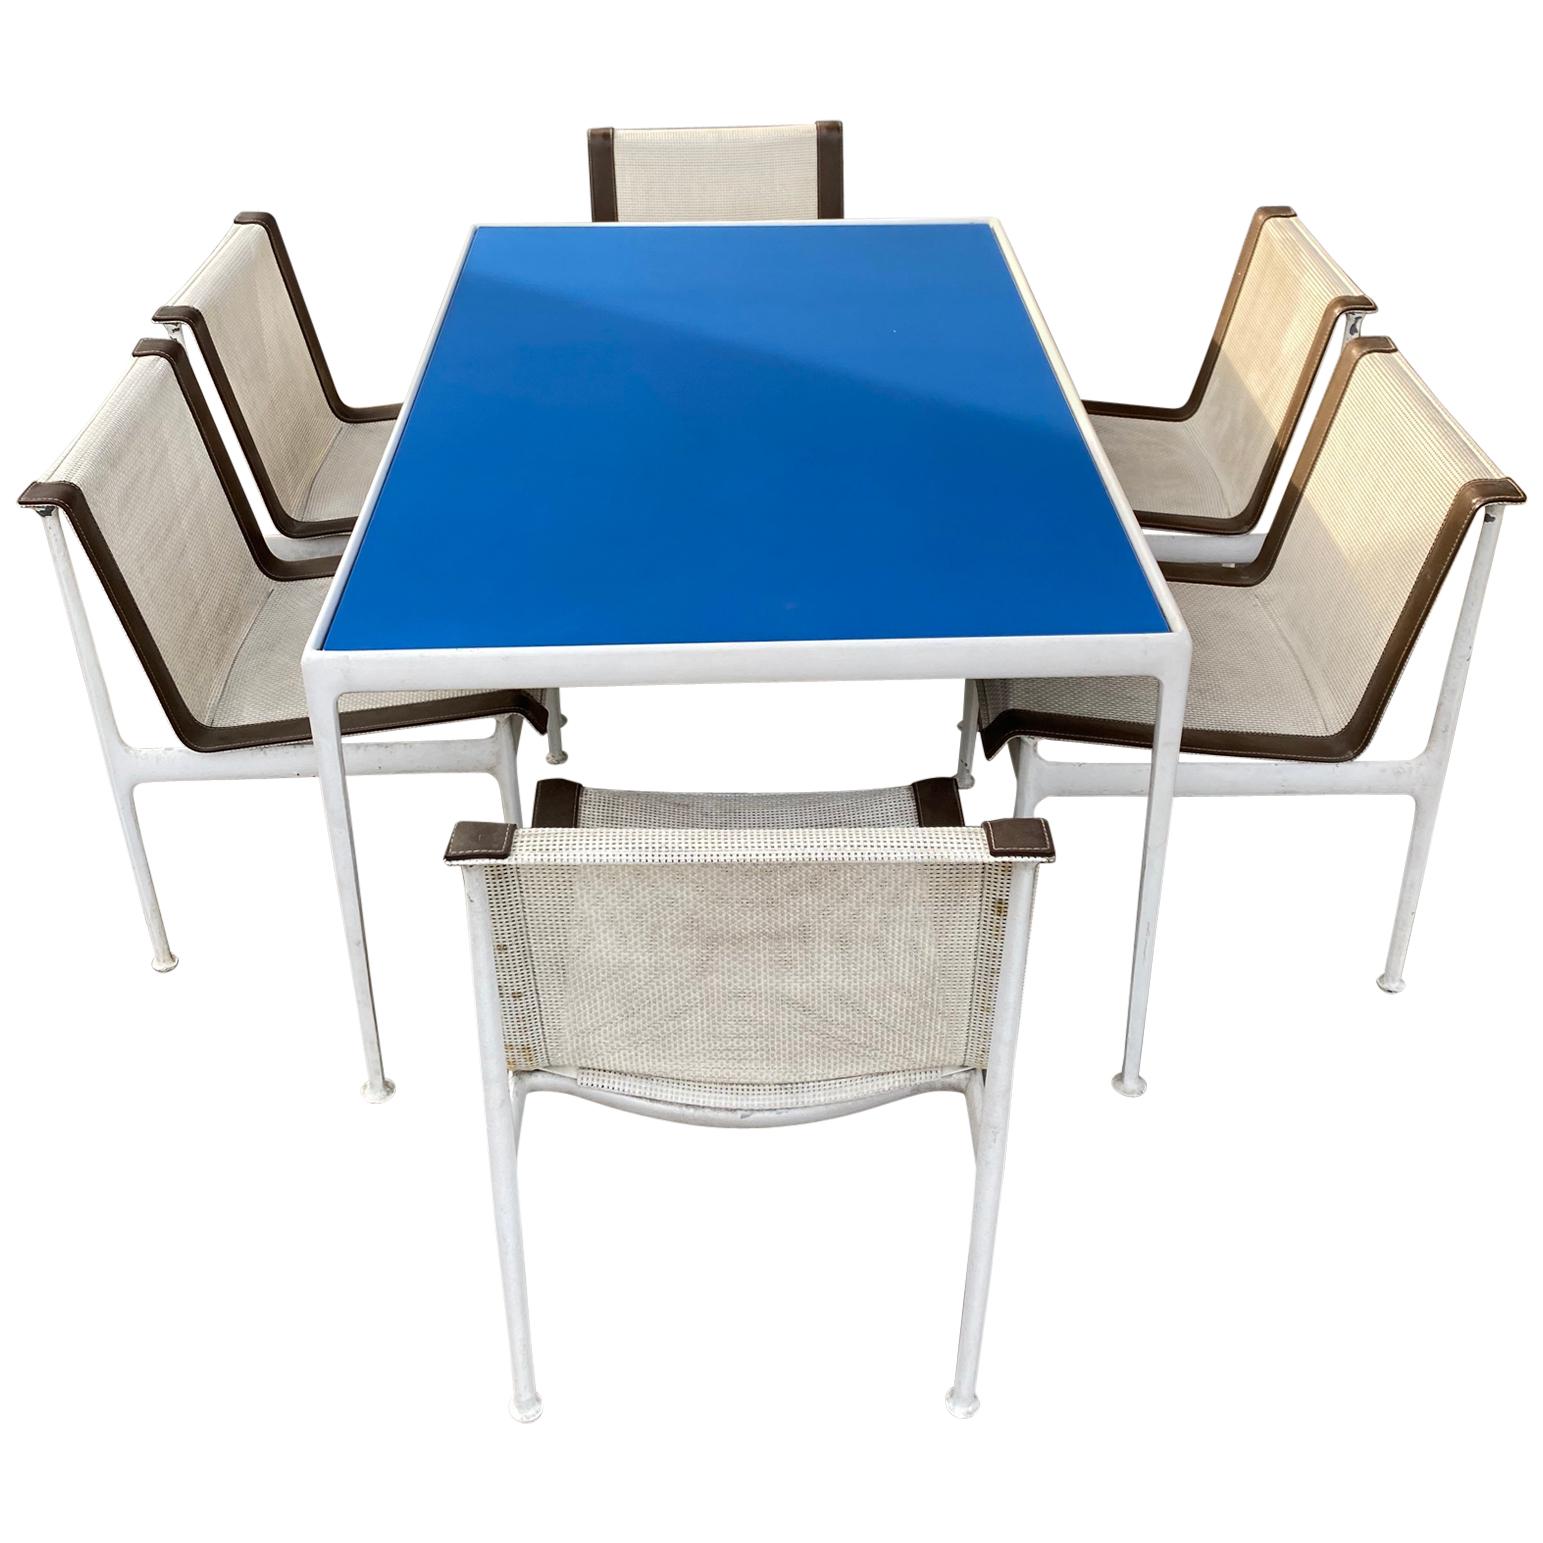 Richard Shultz for Knoll Outdoor Dining Set, Blue Enamel Table, 6 Chairs